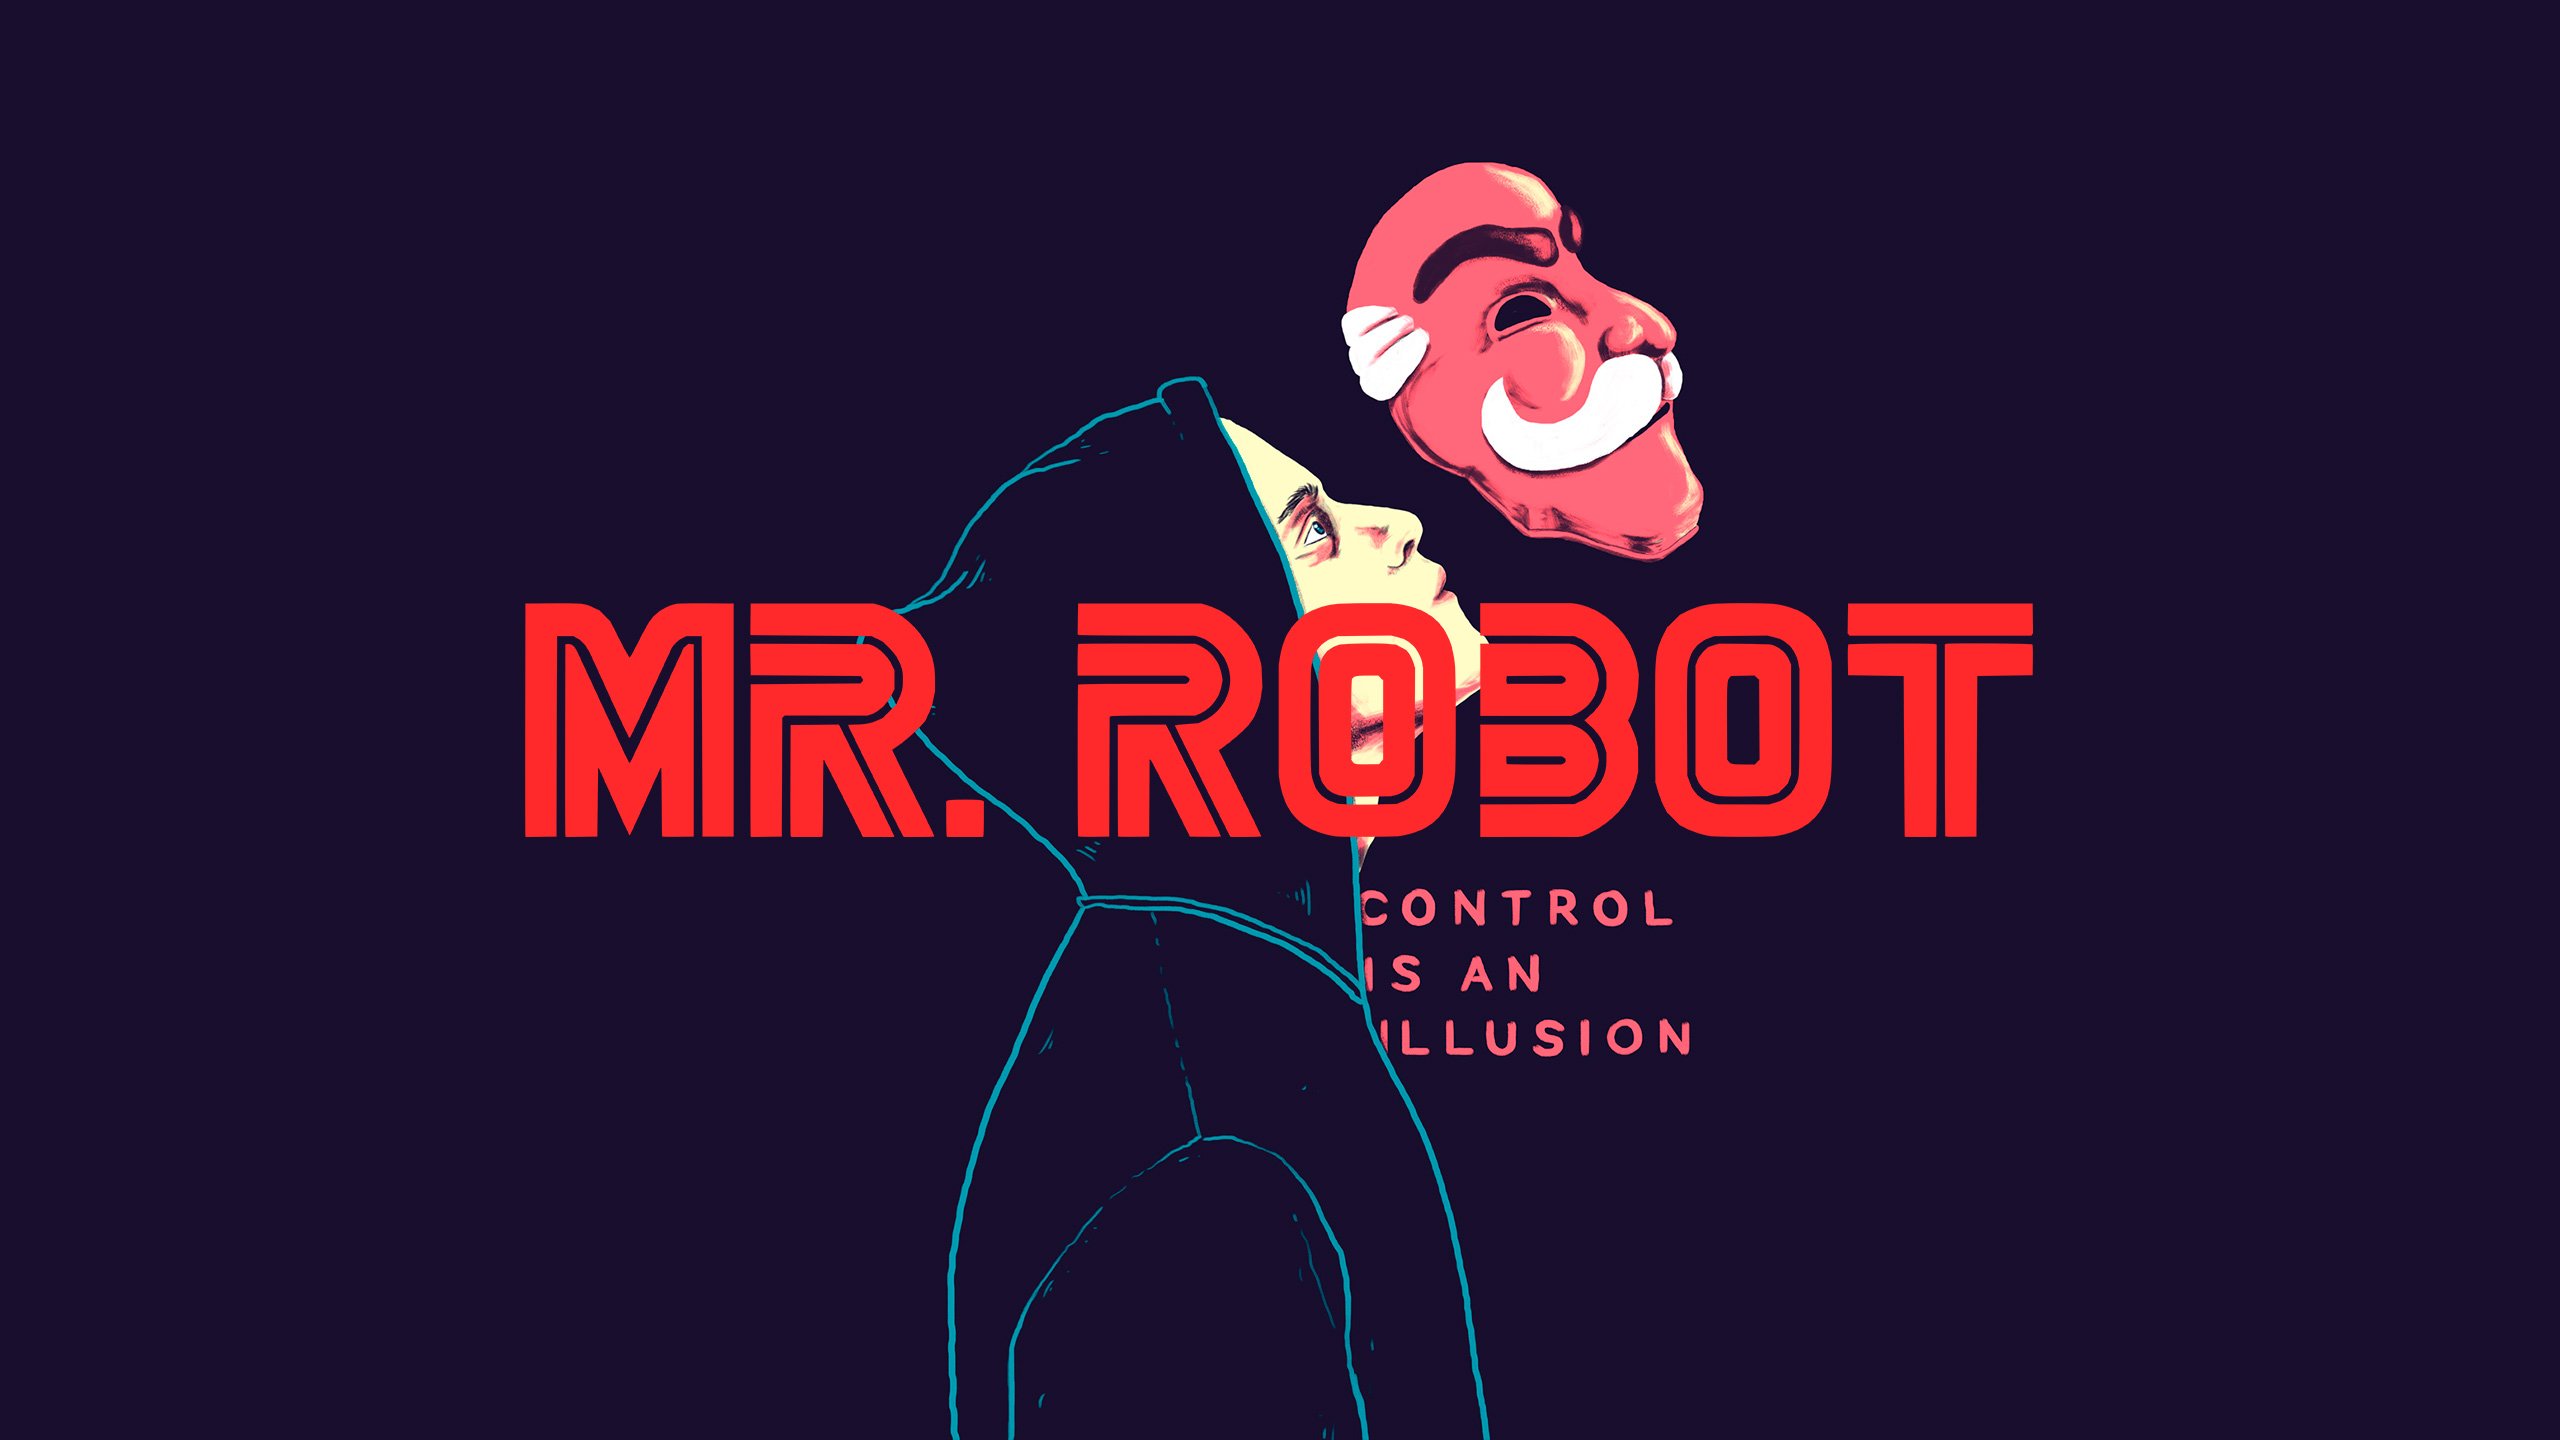 Mr Robot Control Is An Illusion HD Wallpaper